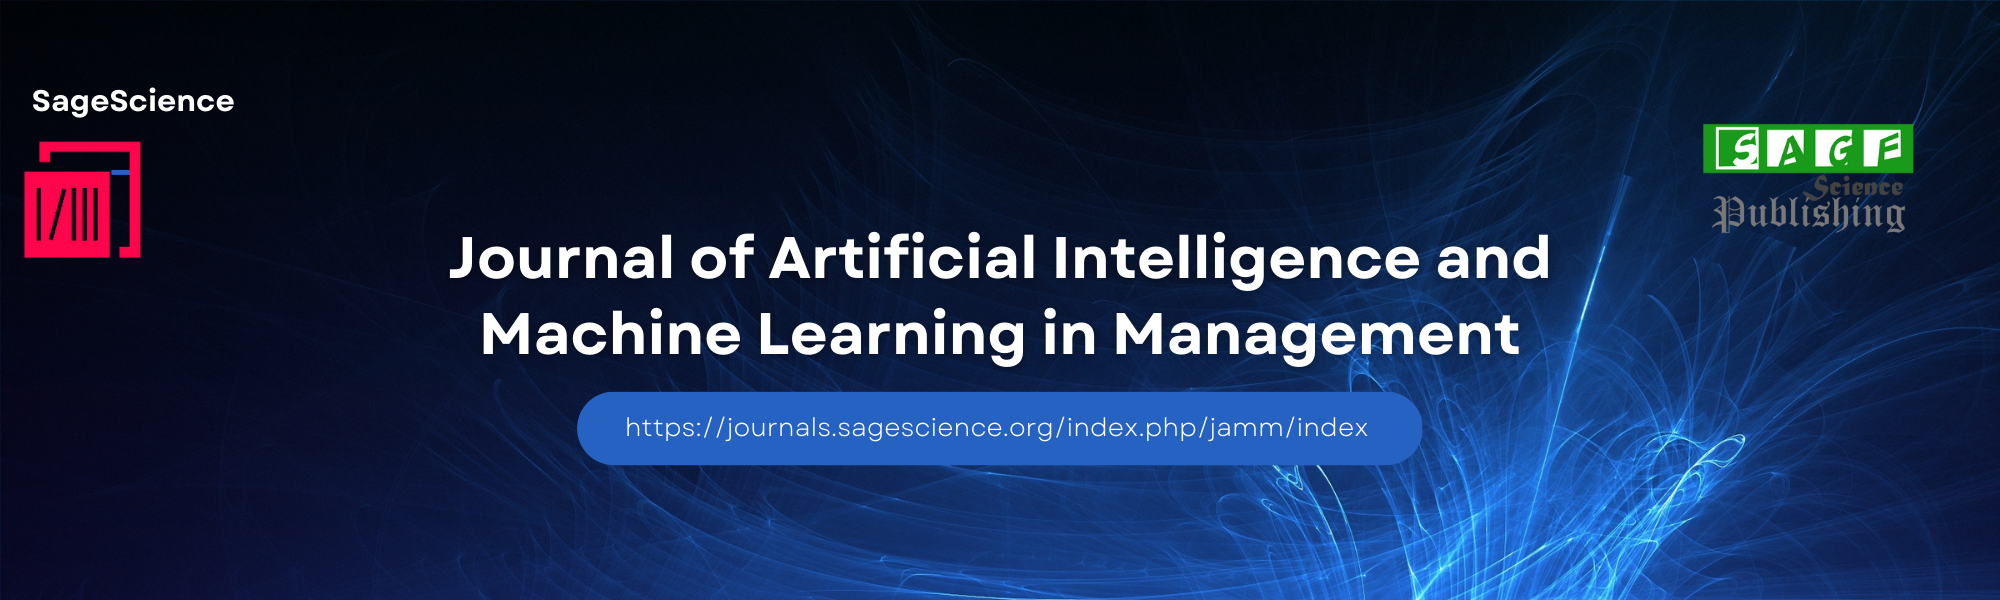 Journal of Artificial Intelligence and Machine Learning in Management